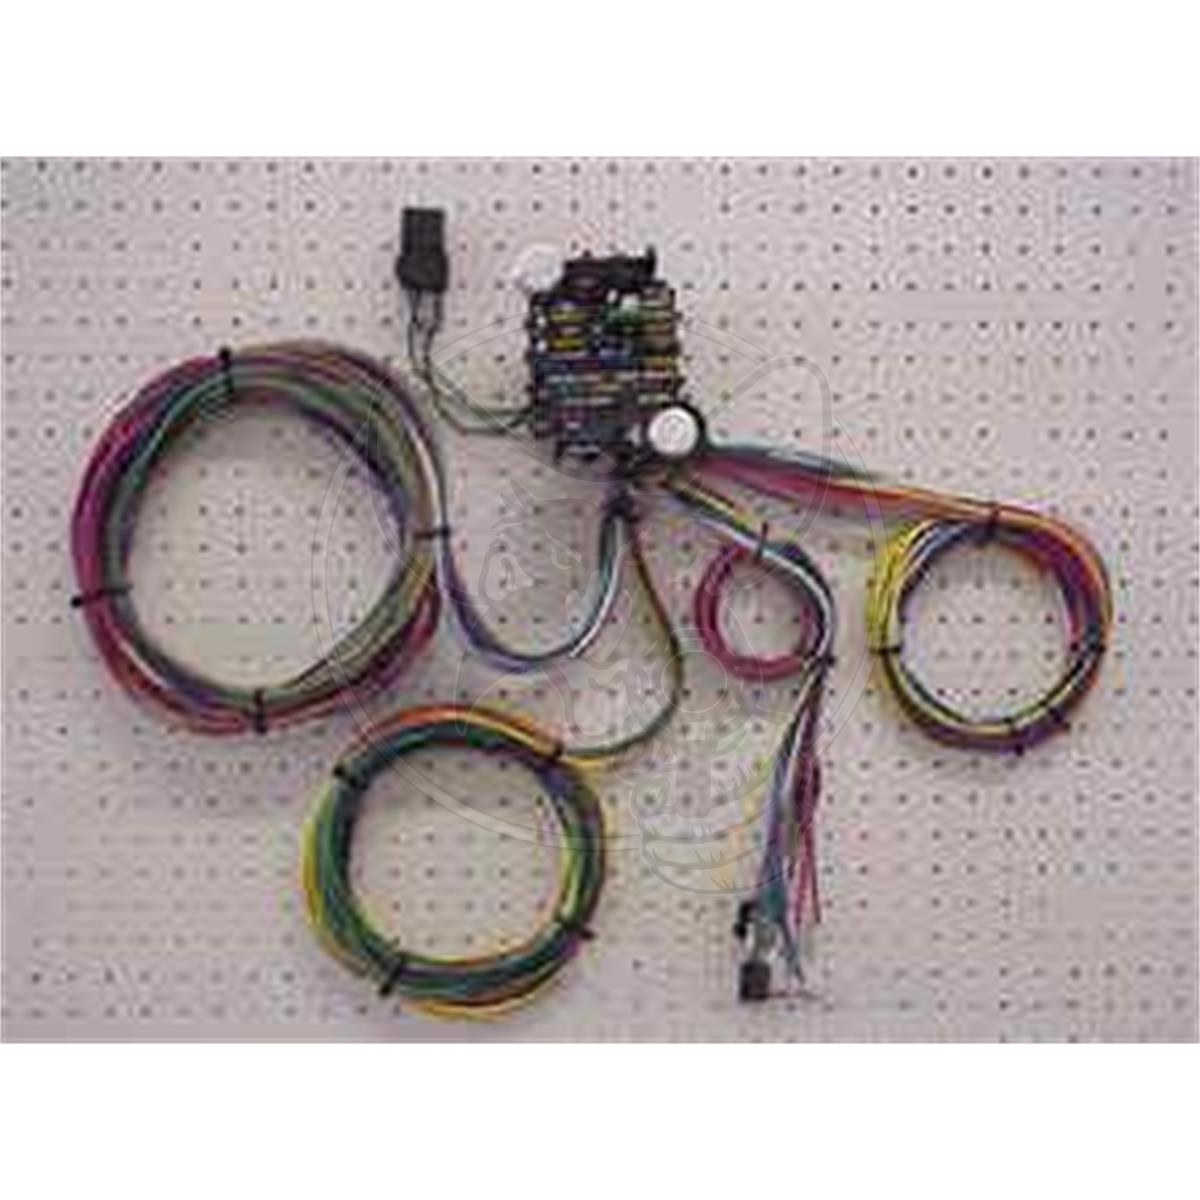 EZ COMPLETE WIRING HARNESS 21-CIRCUIT WITH STD FUSES & FUSE PANEL